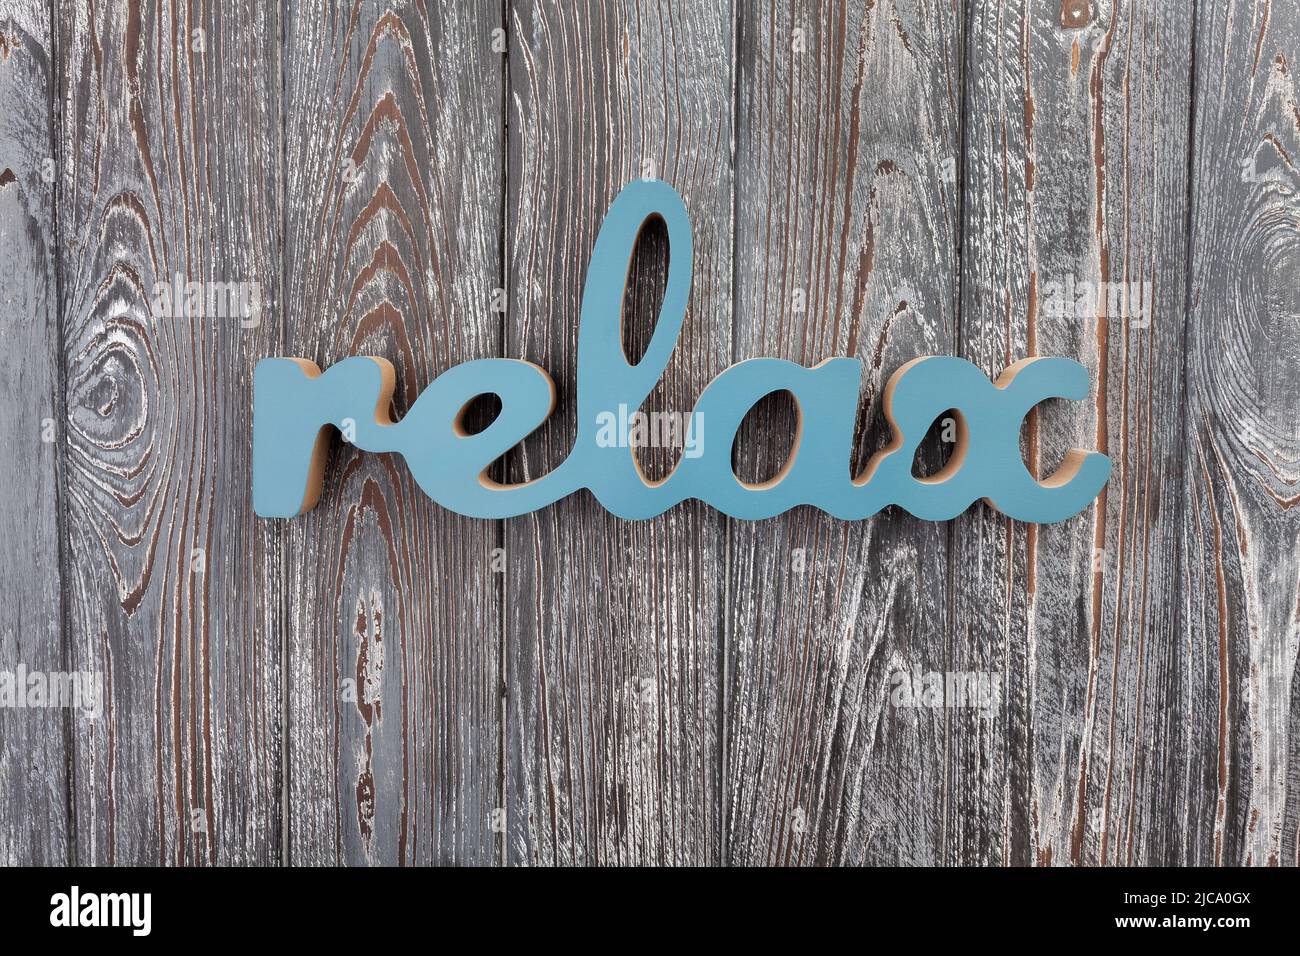 carved wooden letters relax on wood background Stock Photo